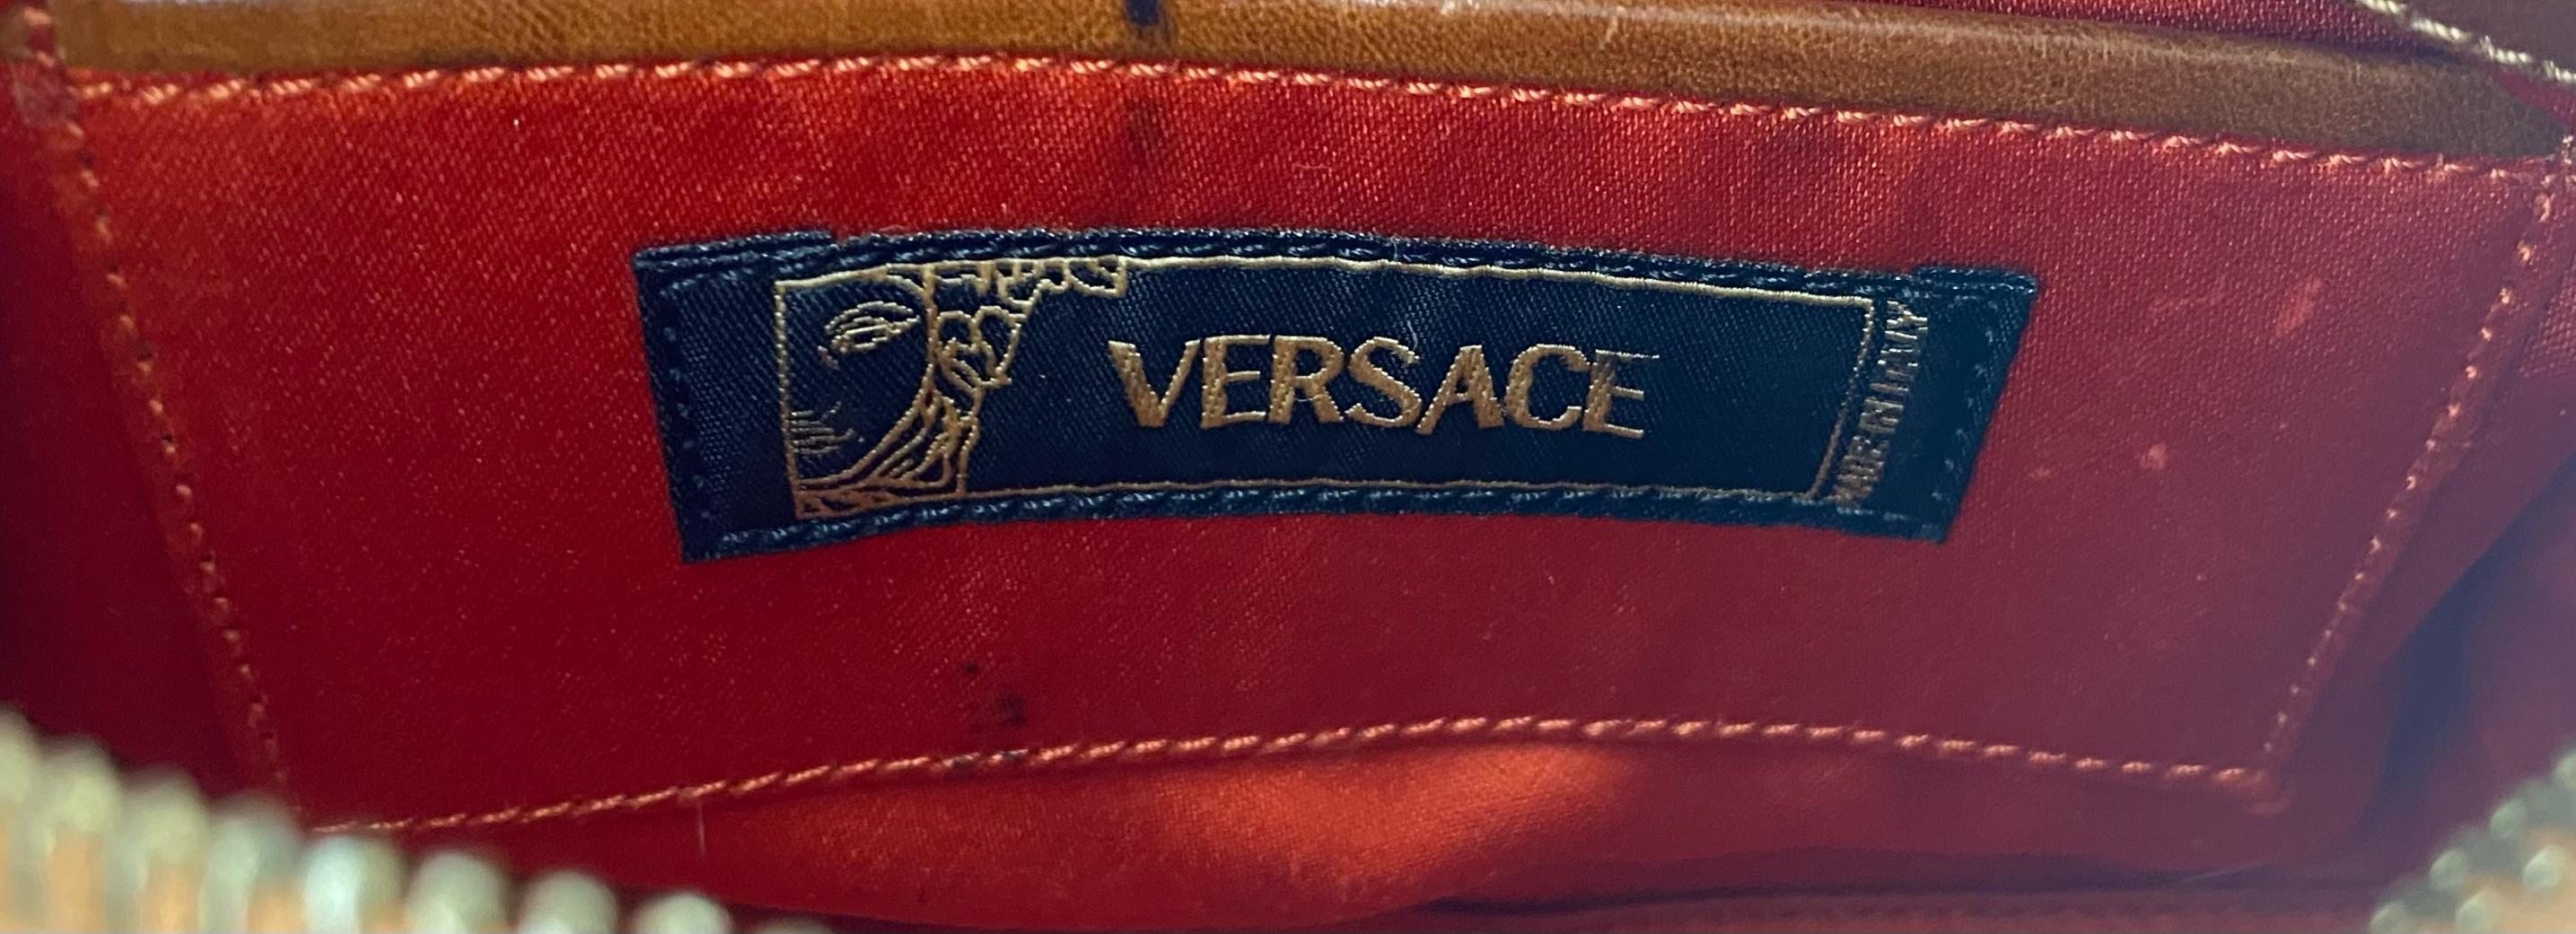 S/S 2005 Versace by Donatella Micro/Mini Ocean Themed Duffle Bag  In Fair Condition For Sale In West Hollywood, CA